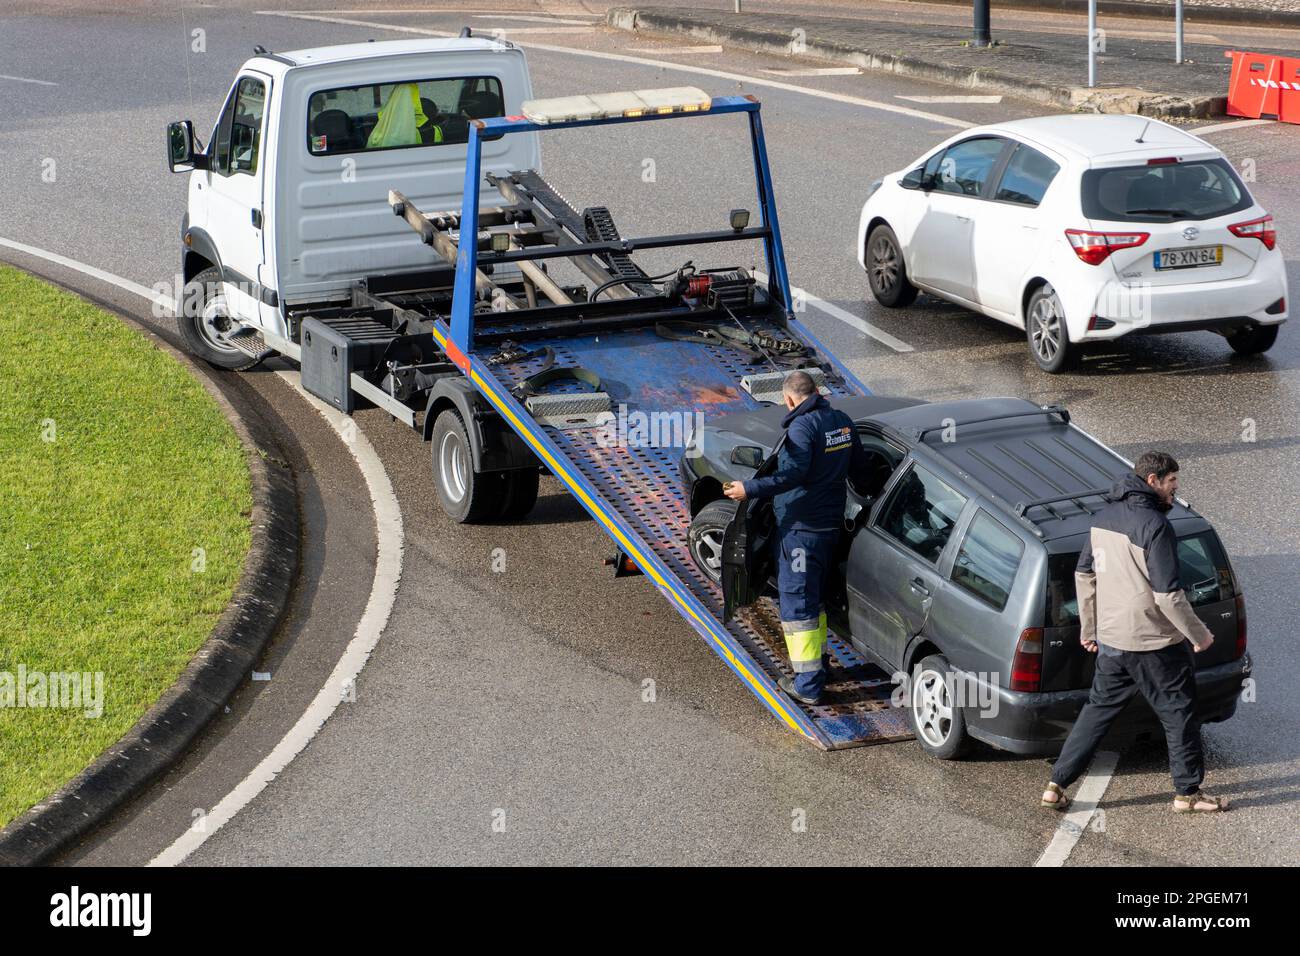 Damaged car being loaded onto a tow truck Stock Photo